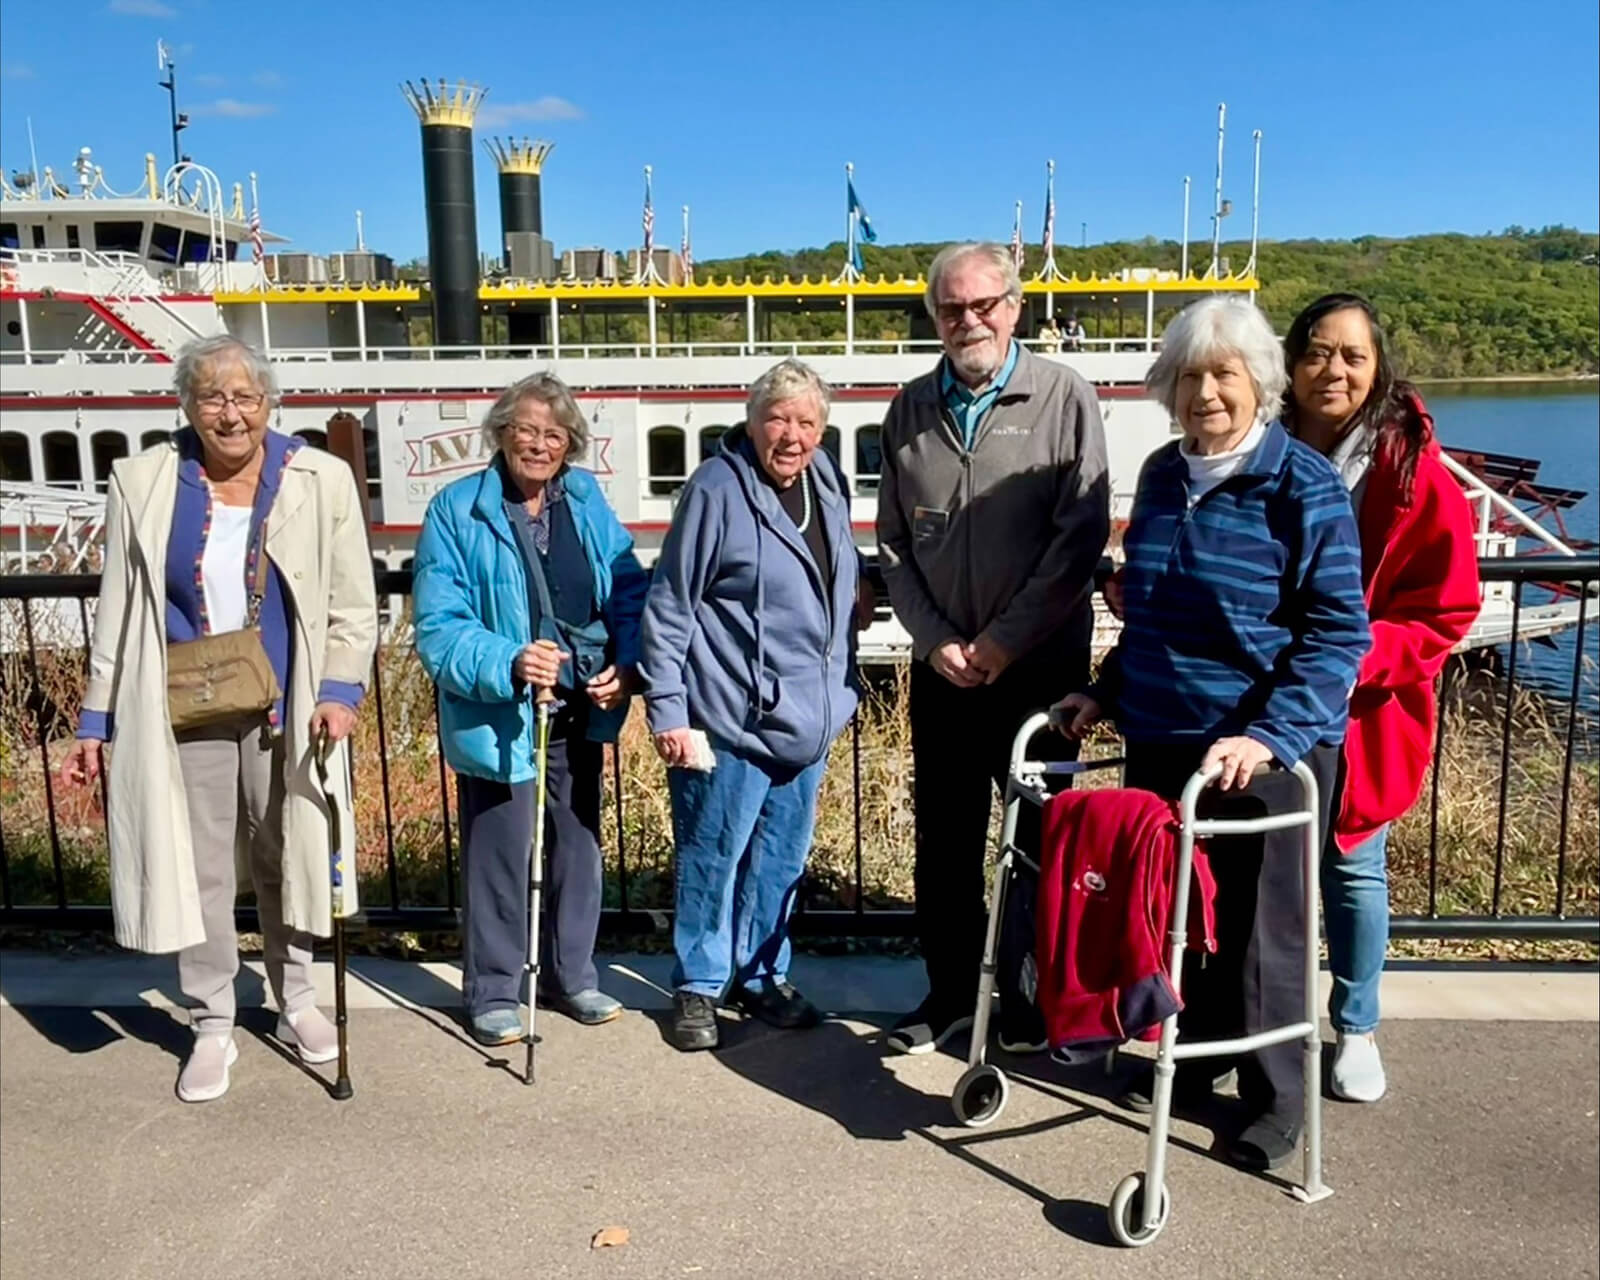 Residents of The Waters on 50th enjoying a sunny day outdoors in Minneapolis, with the iconic paddleboat in the background.